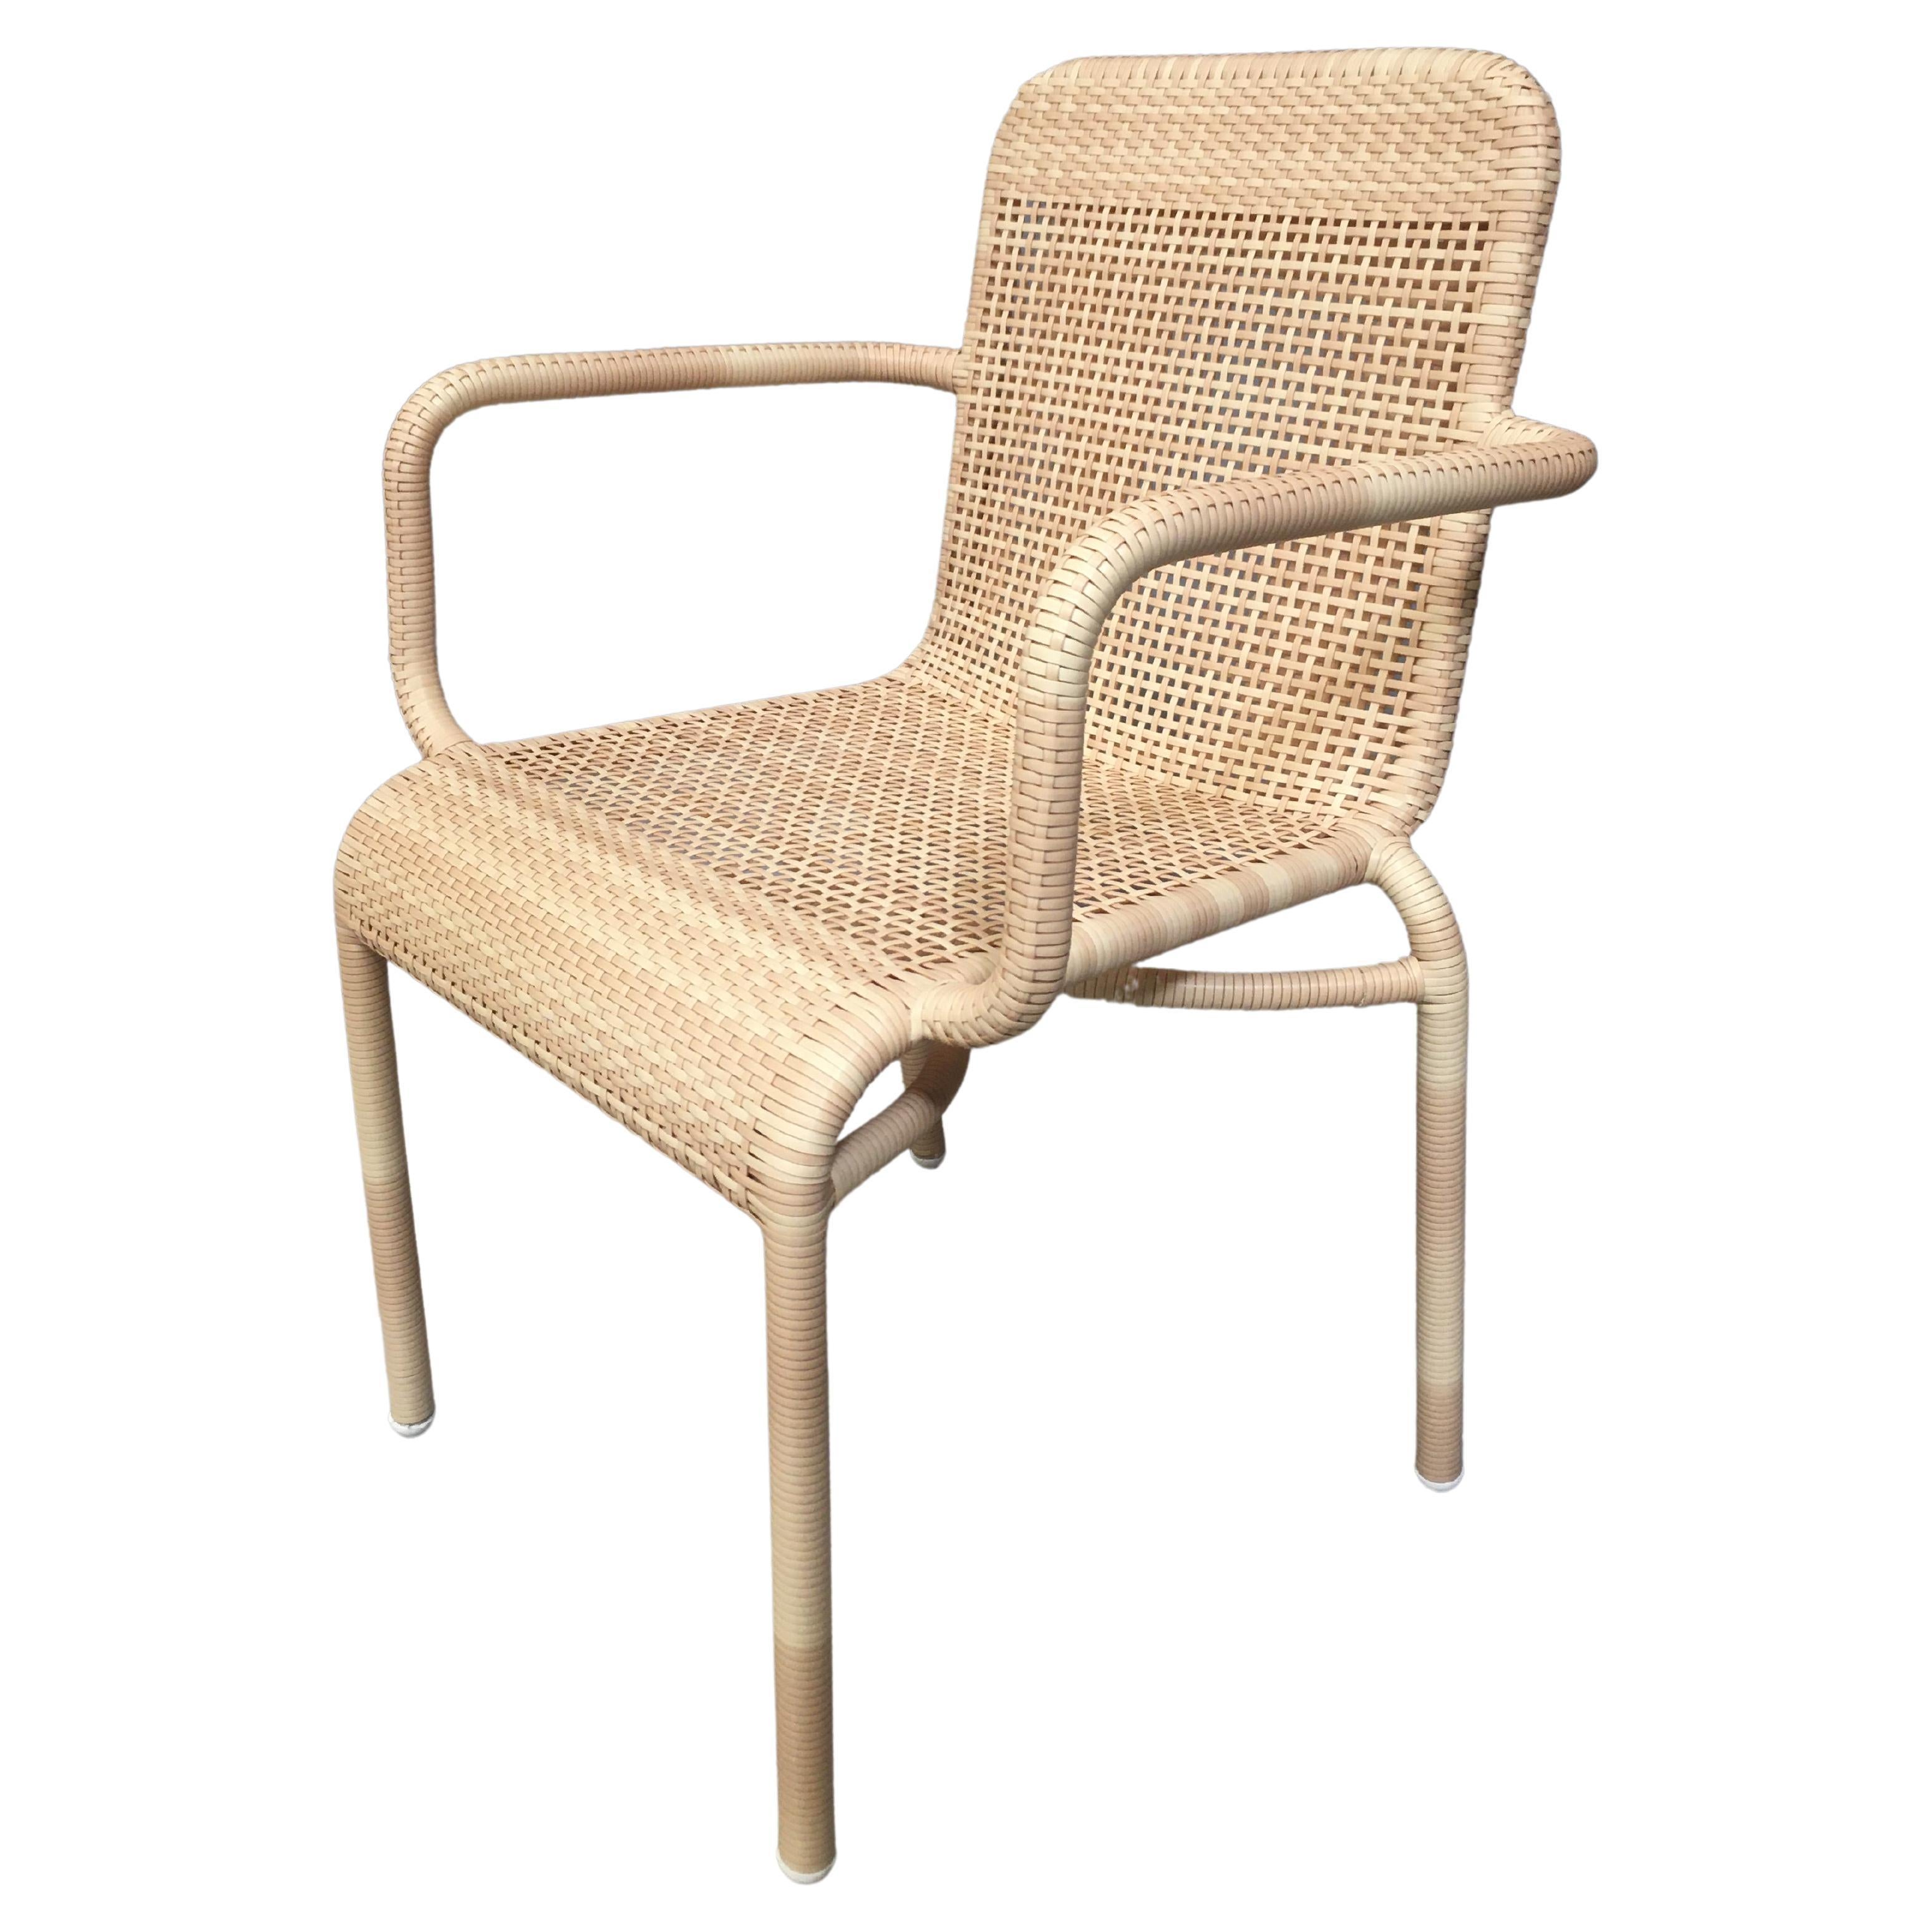 French Design and Braided Resin Rattan Effect Outdoor Chair For Sale